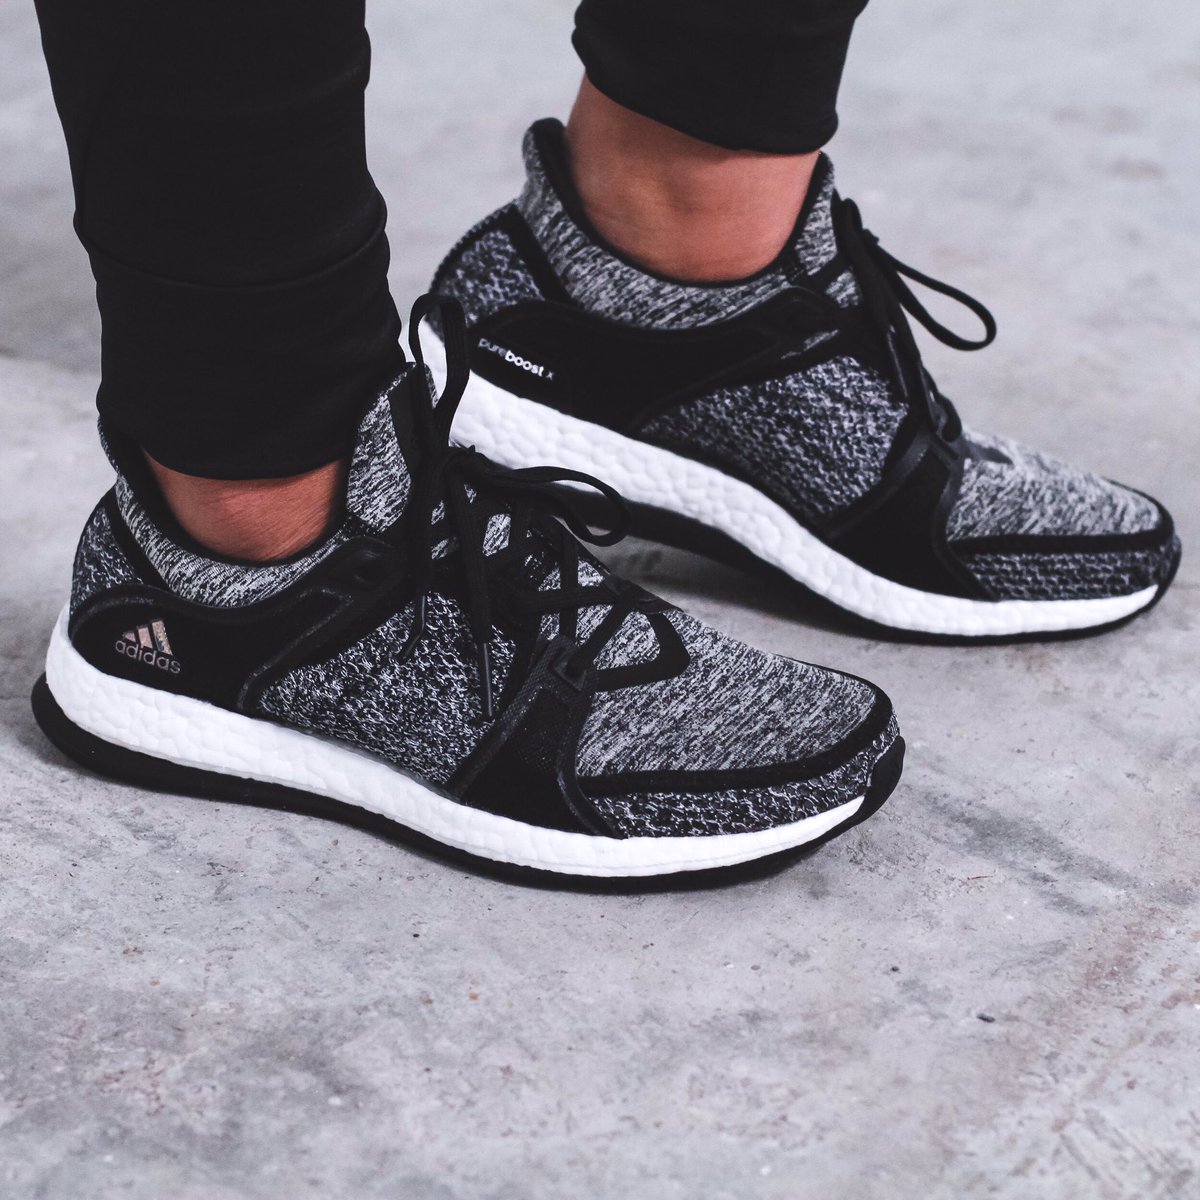 reigning champ x adidas pure boost x trainer